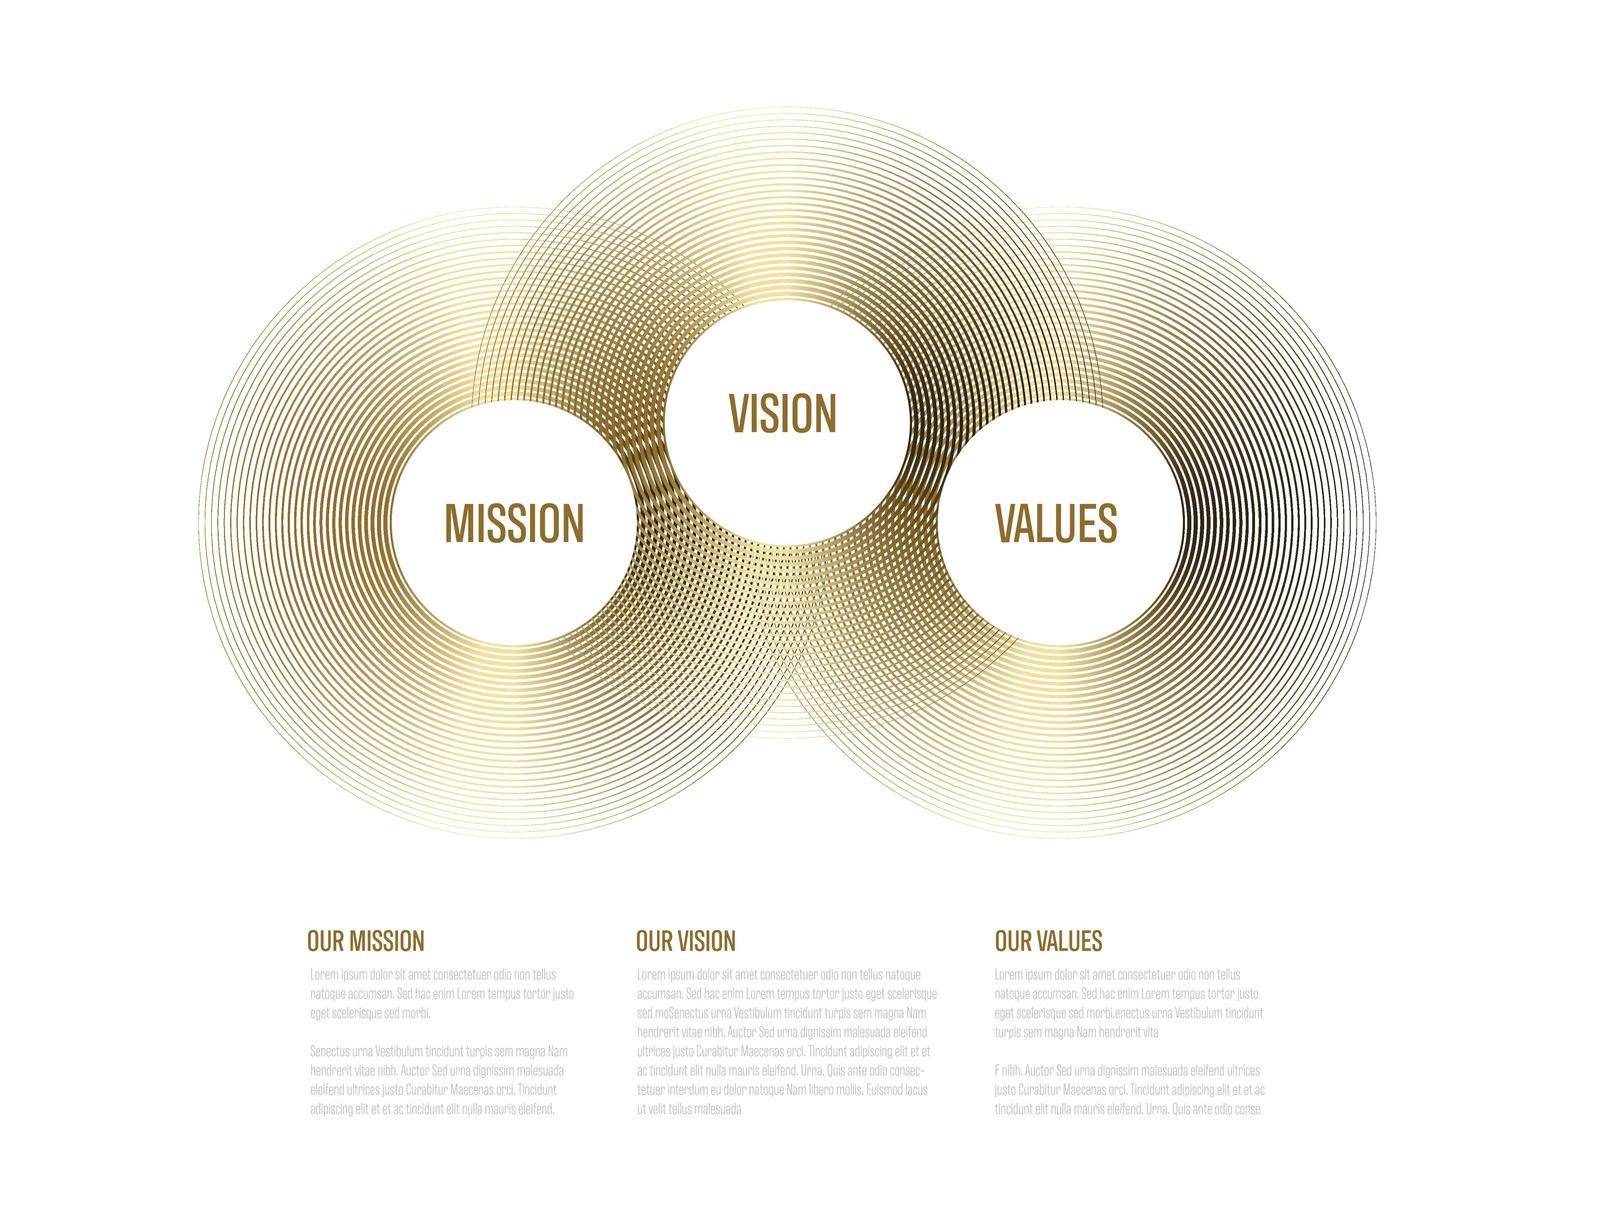 Company profile statement - mission, vision, values as golden circles by orson